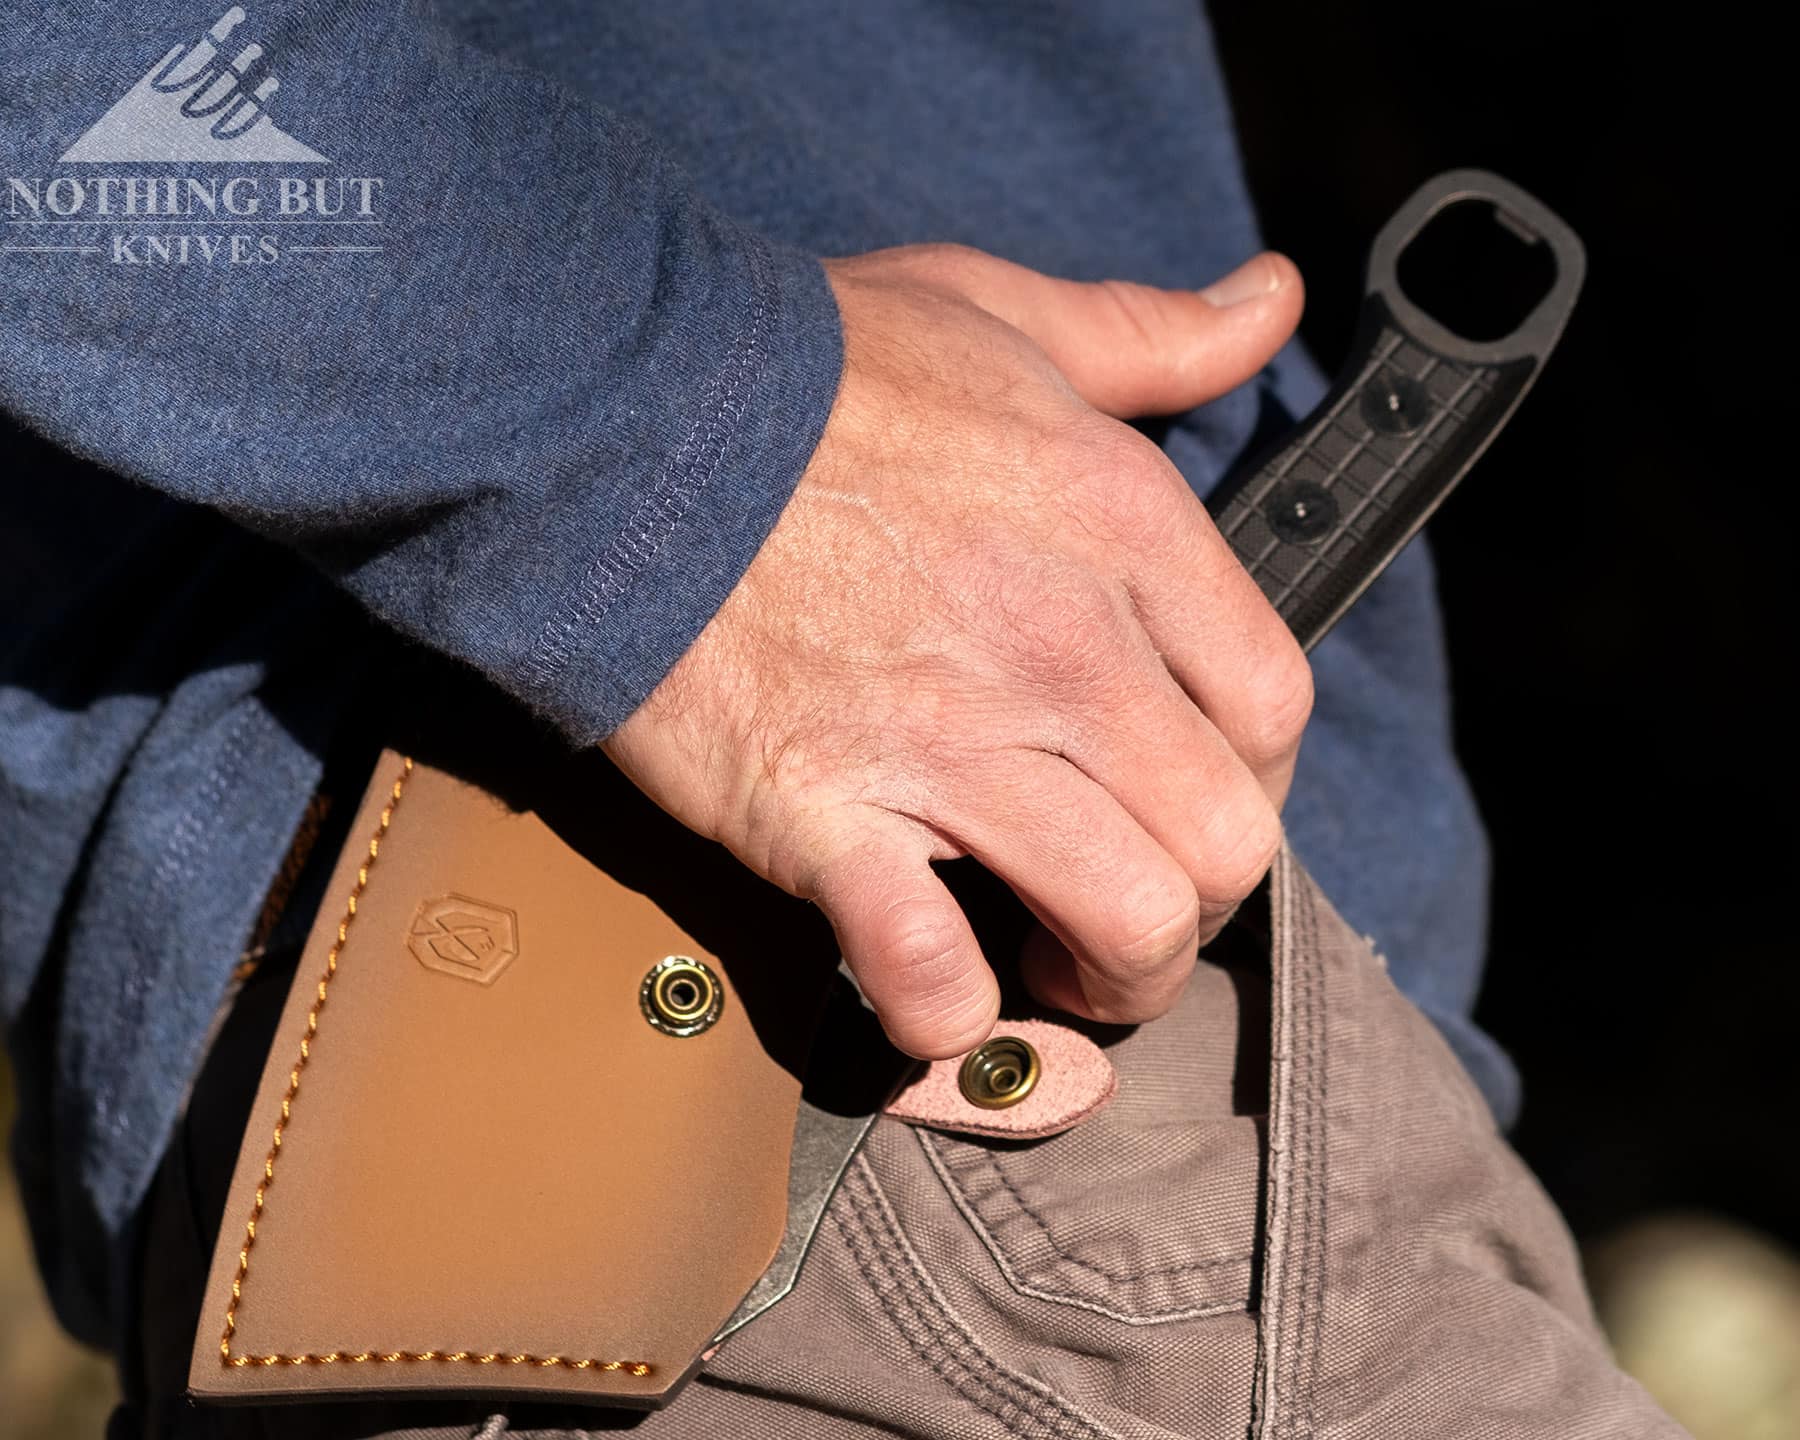 Minibarbar cleaver sheath deployment is easy with a little practice. 